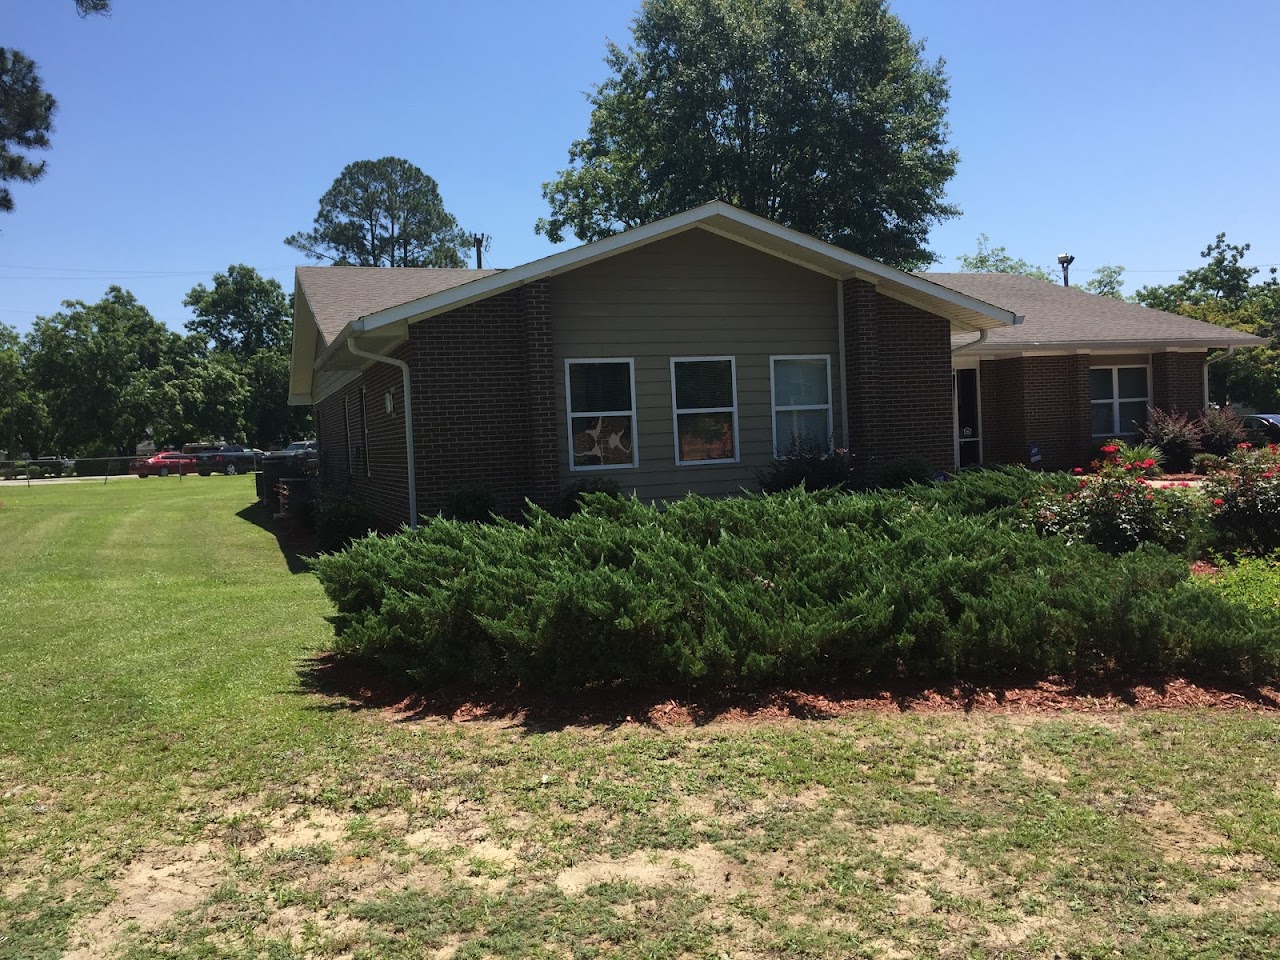 Photo of BRIDGECREEK APARTMENTS. Affordable housing located at 173 BOWENS MILL HWY FITZGERALD, GA 31750